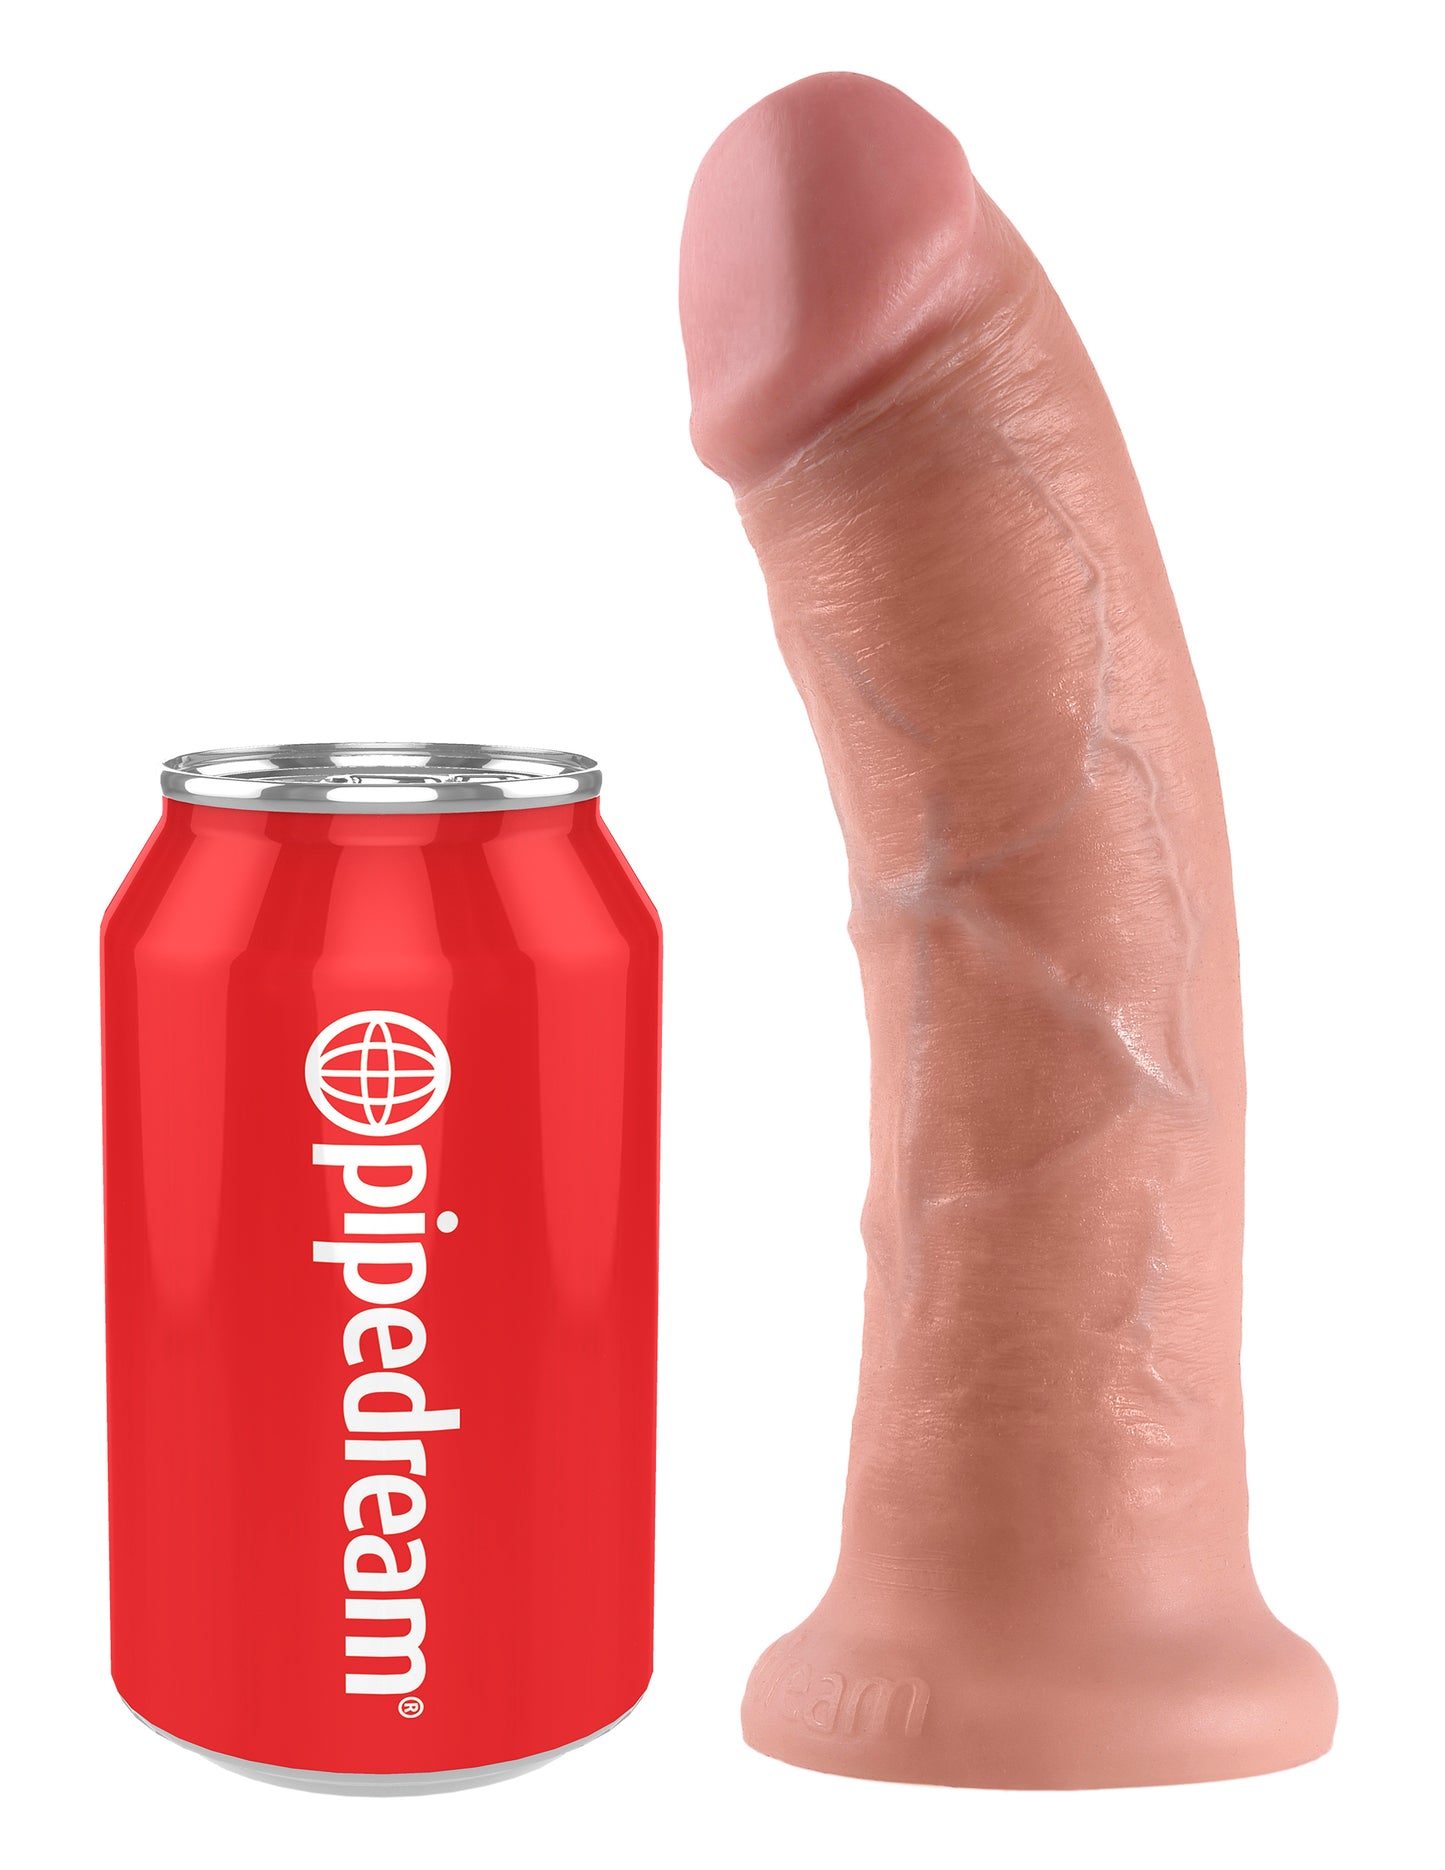 King Cock 8-Inch Cock